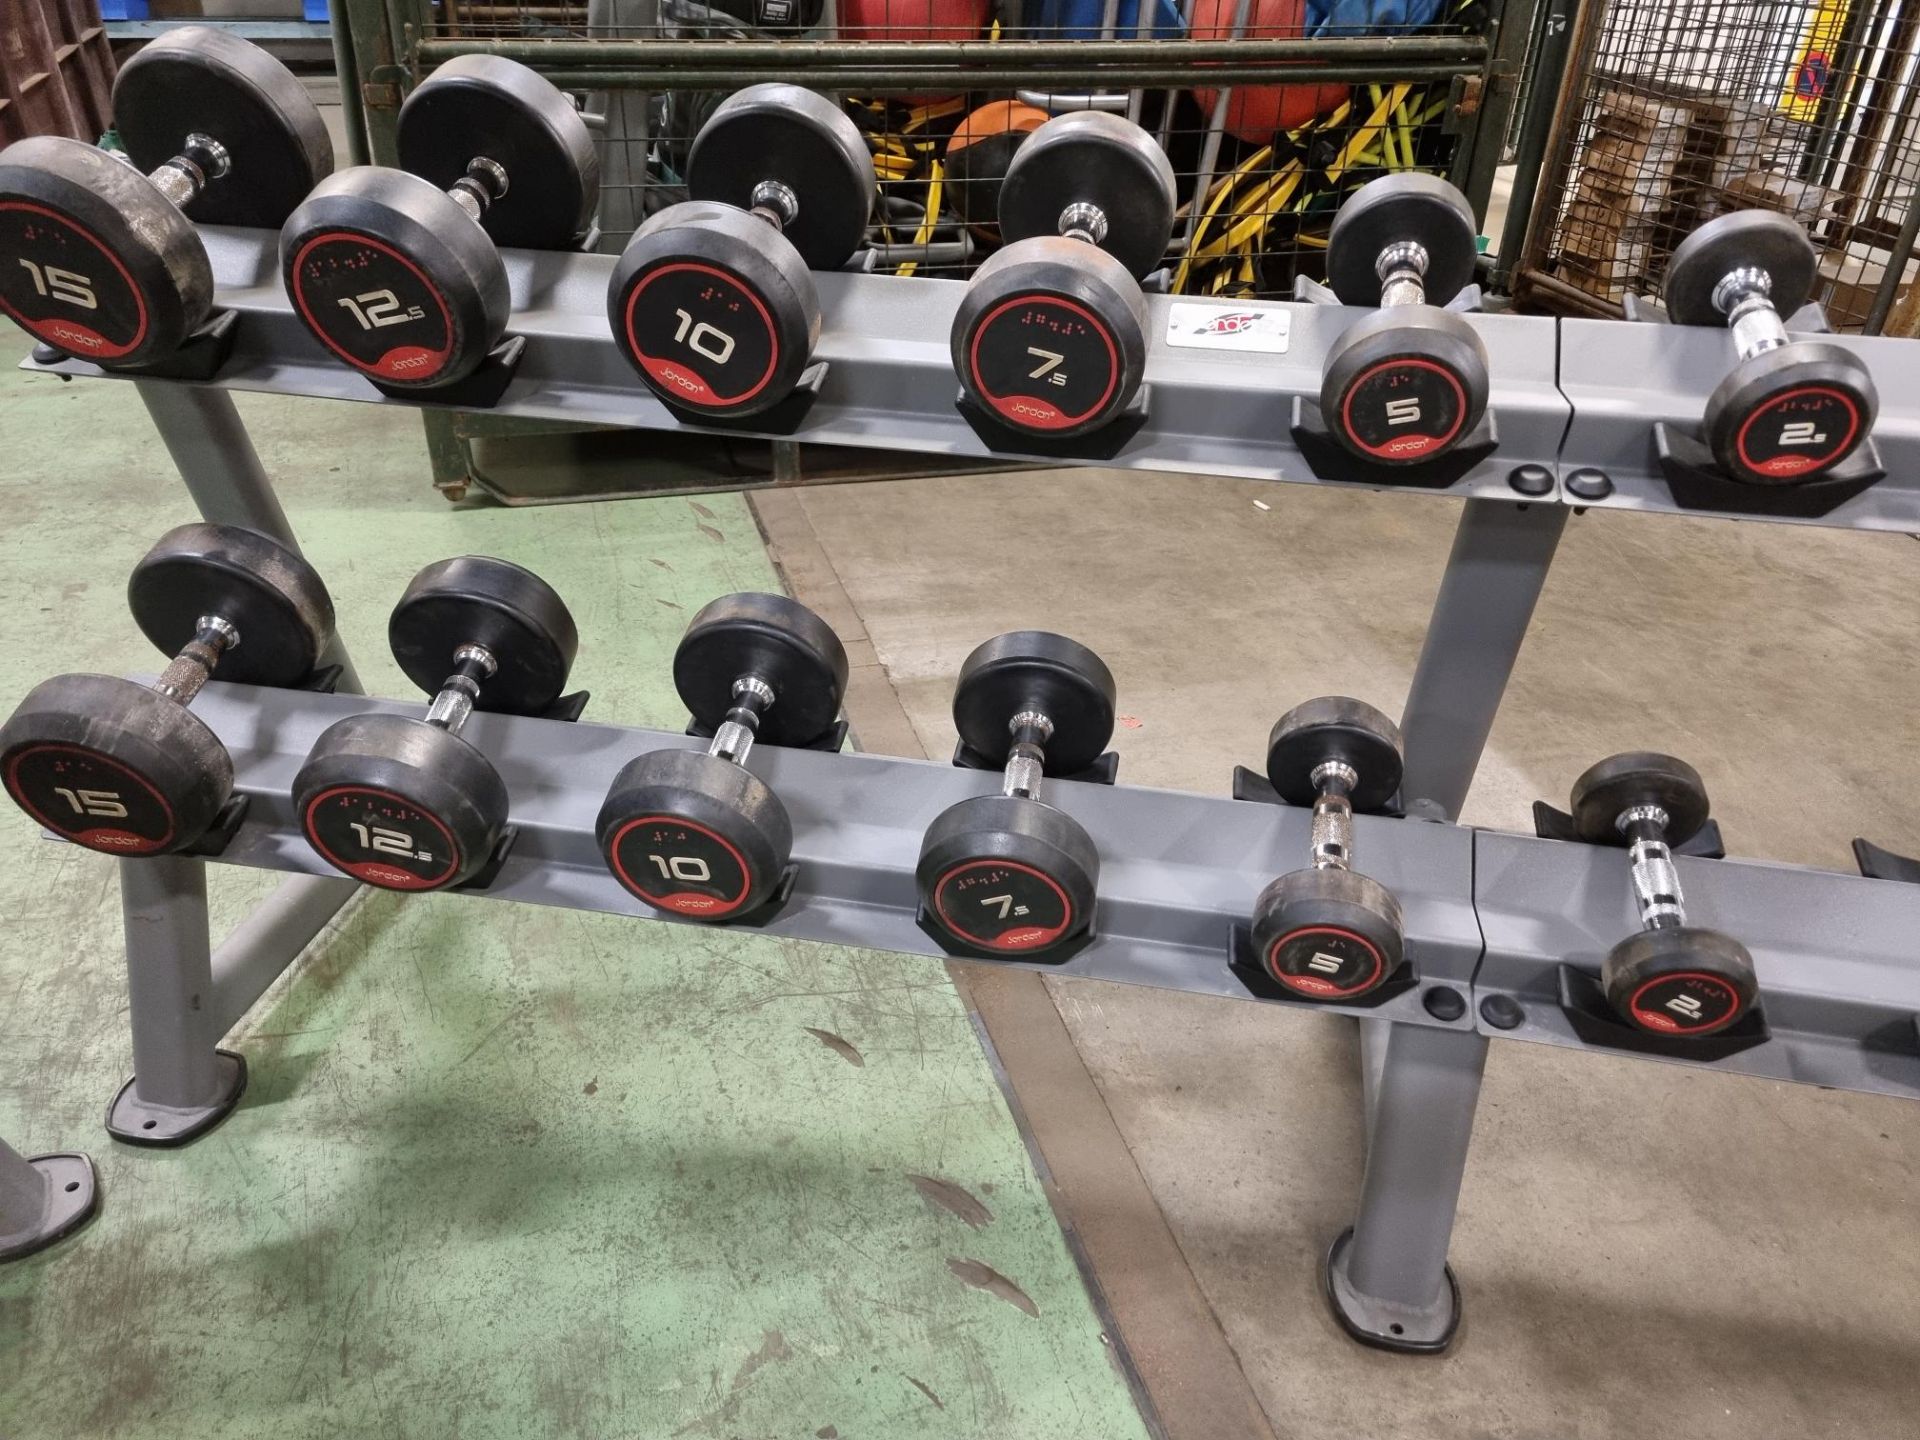 Jordan dumbell weight rack with weights 2.5kg to 50kg - see pictures - Image 12 of 12